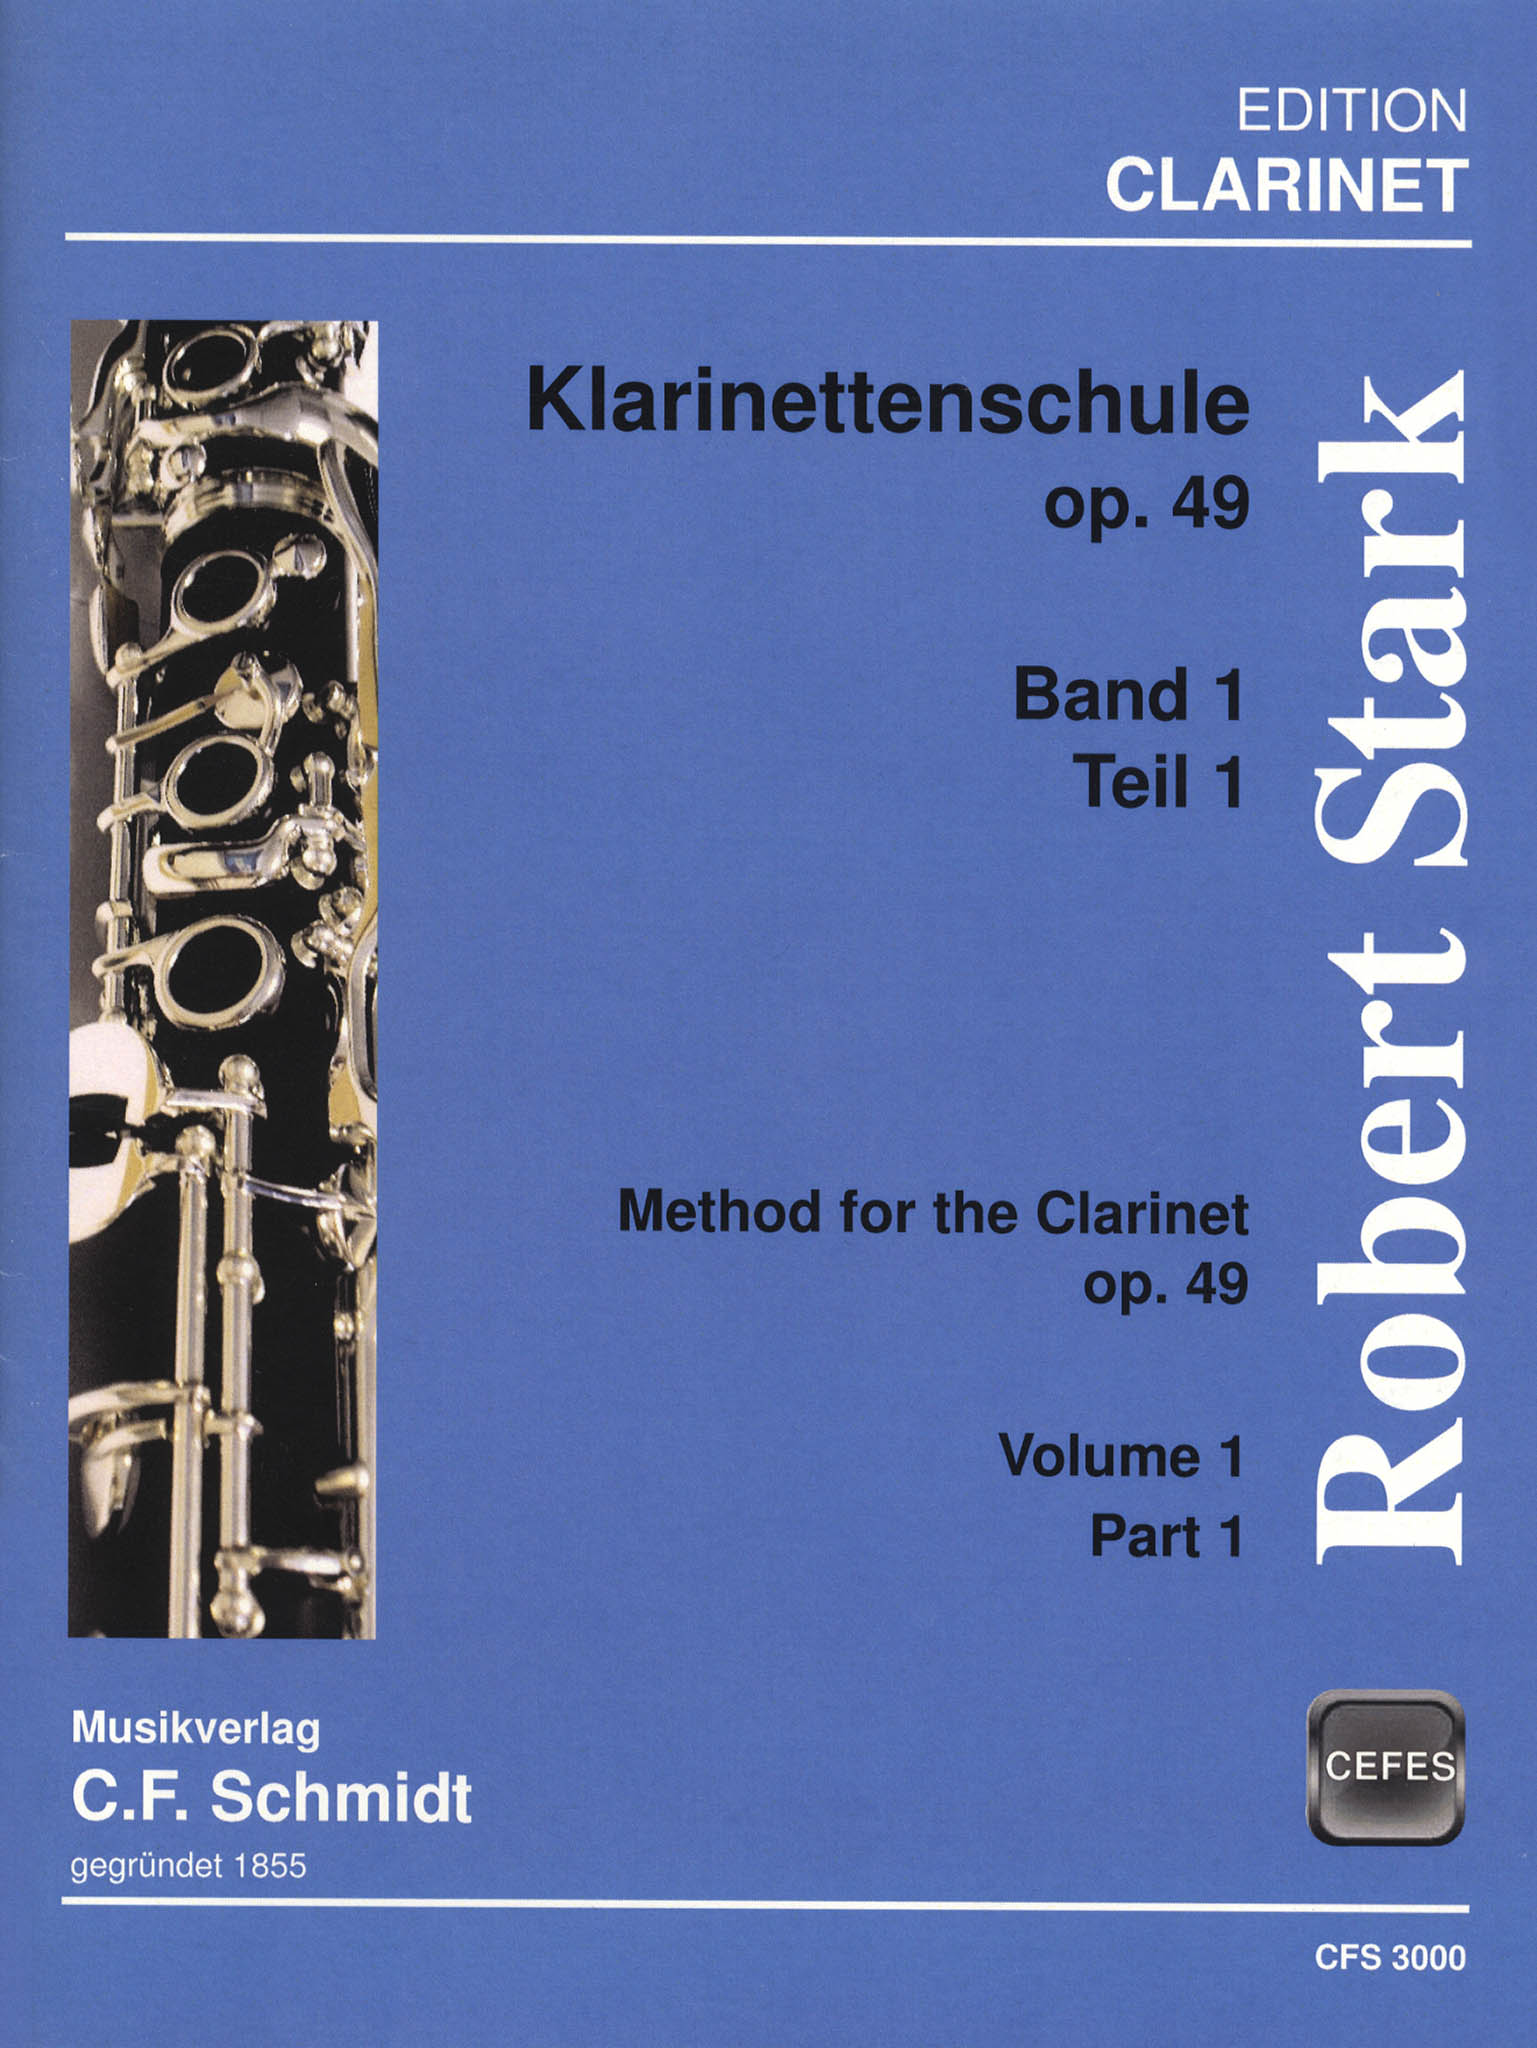 Stark Clarinet Method, Op. 49, Vol. 1: Section 1 of 2 cover